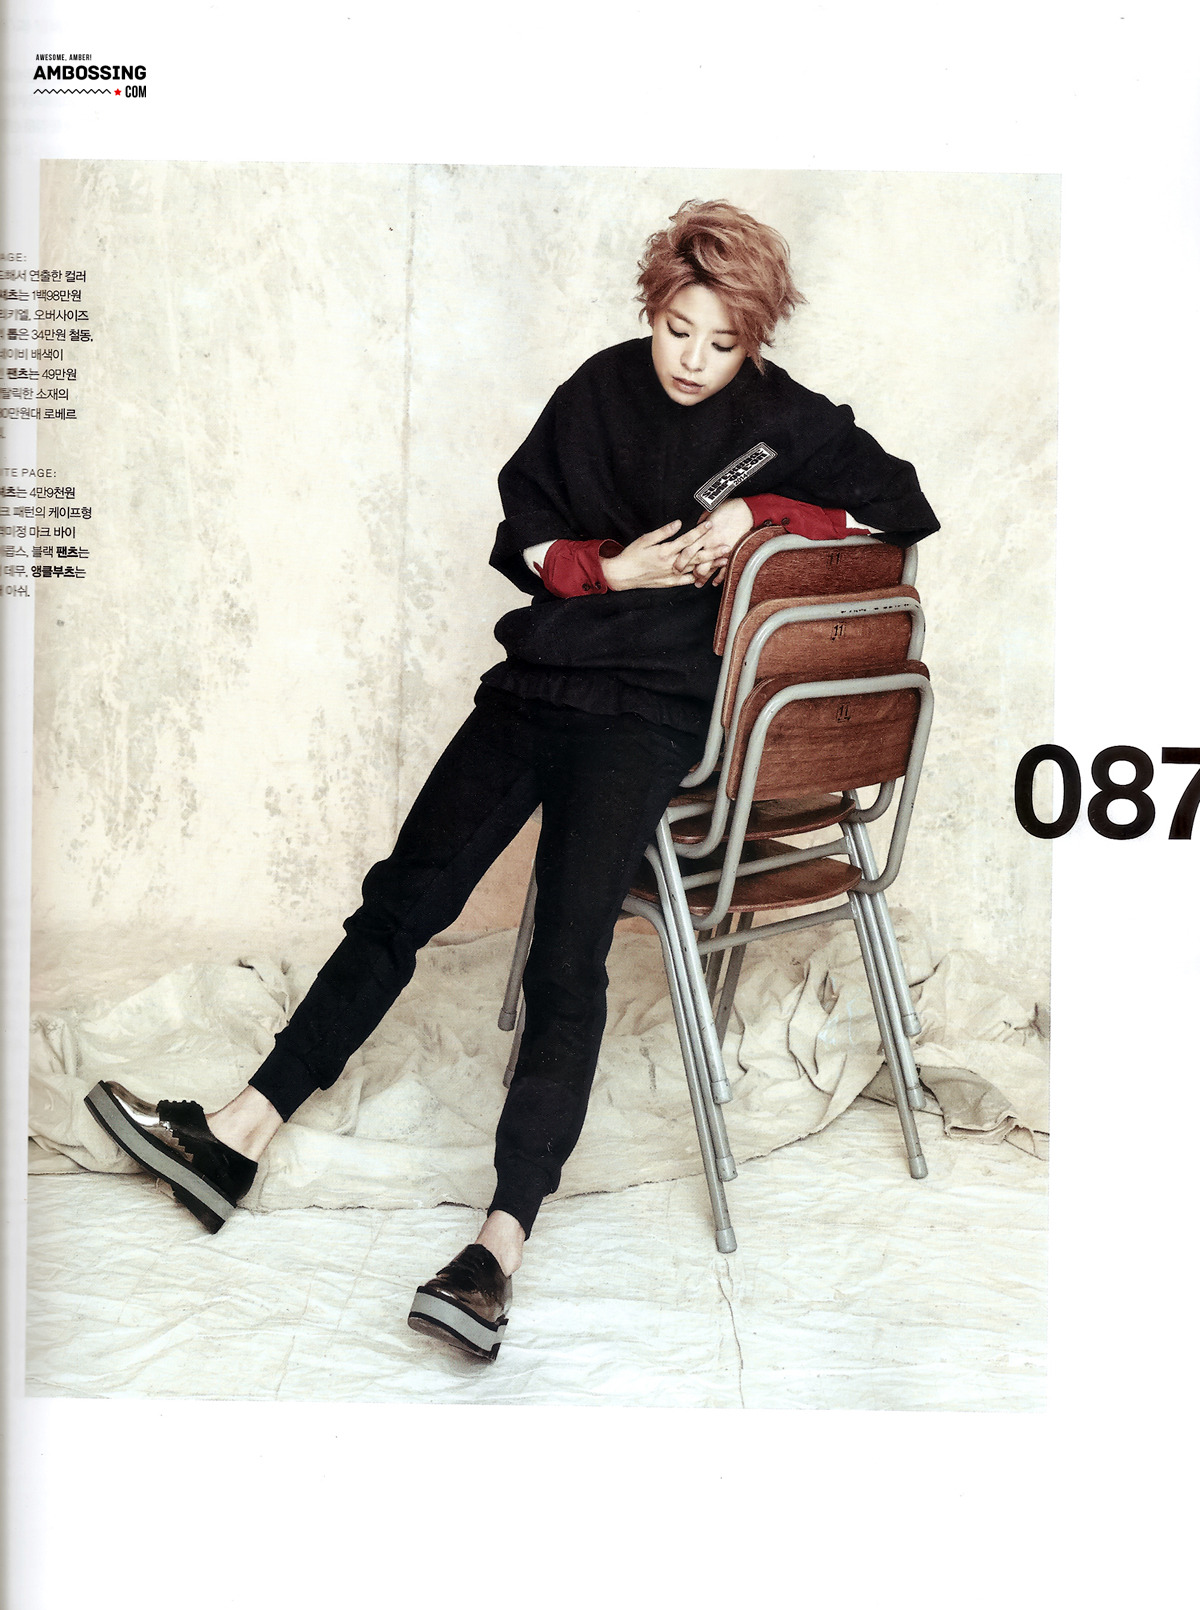 quietlim:  NYLON September Issue HQ SCANS cre.ambossing